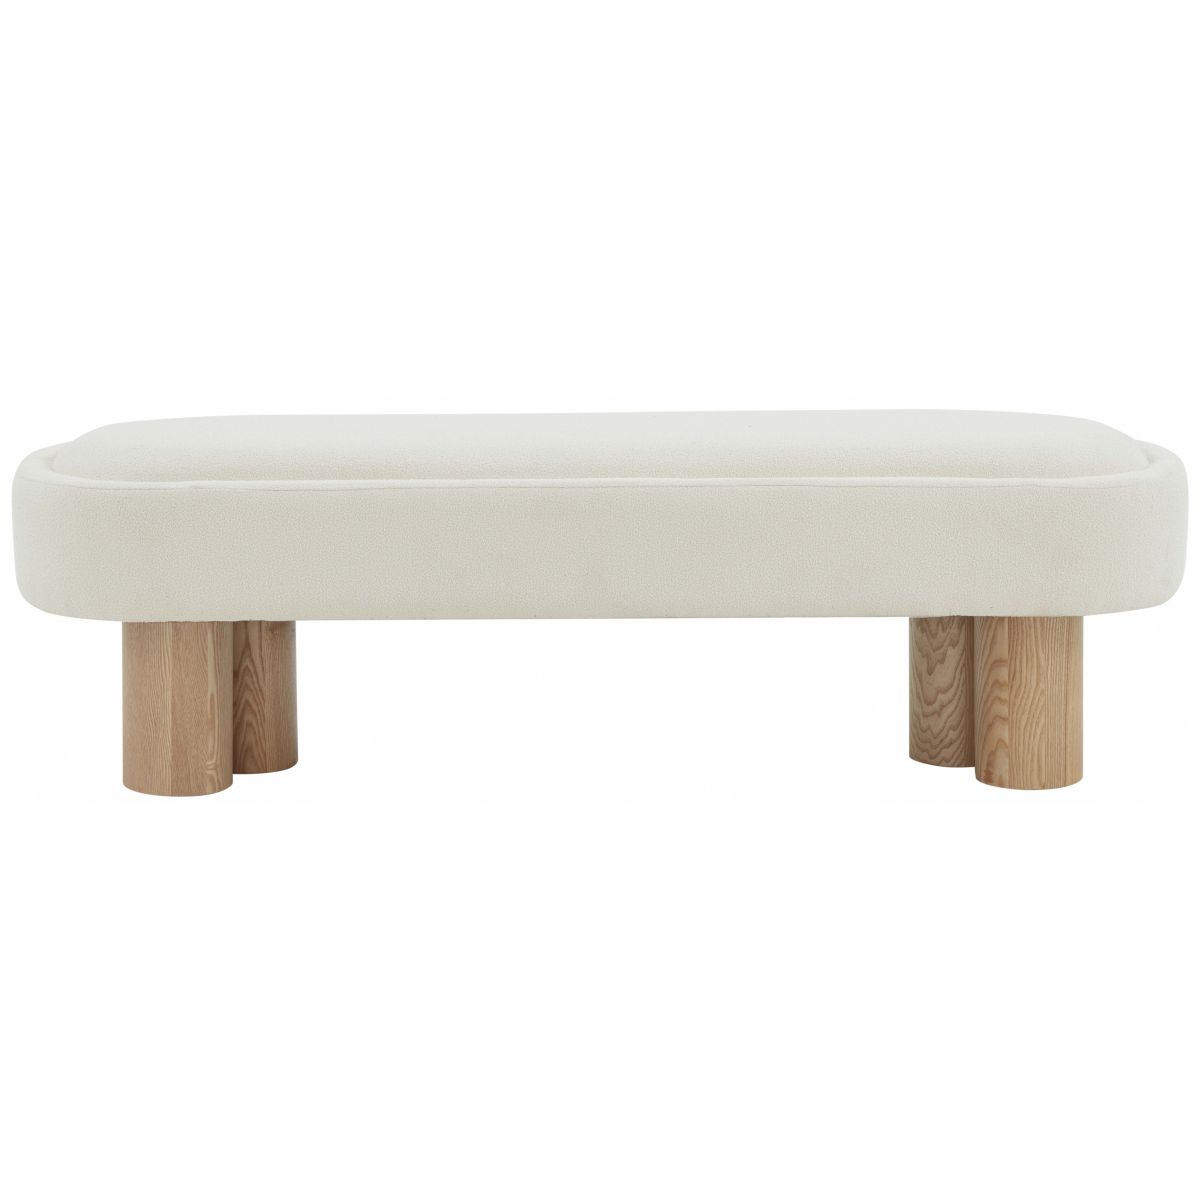 Safavieh Couture Katianna Boucle Bench - Ivory / Natural